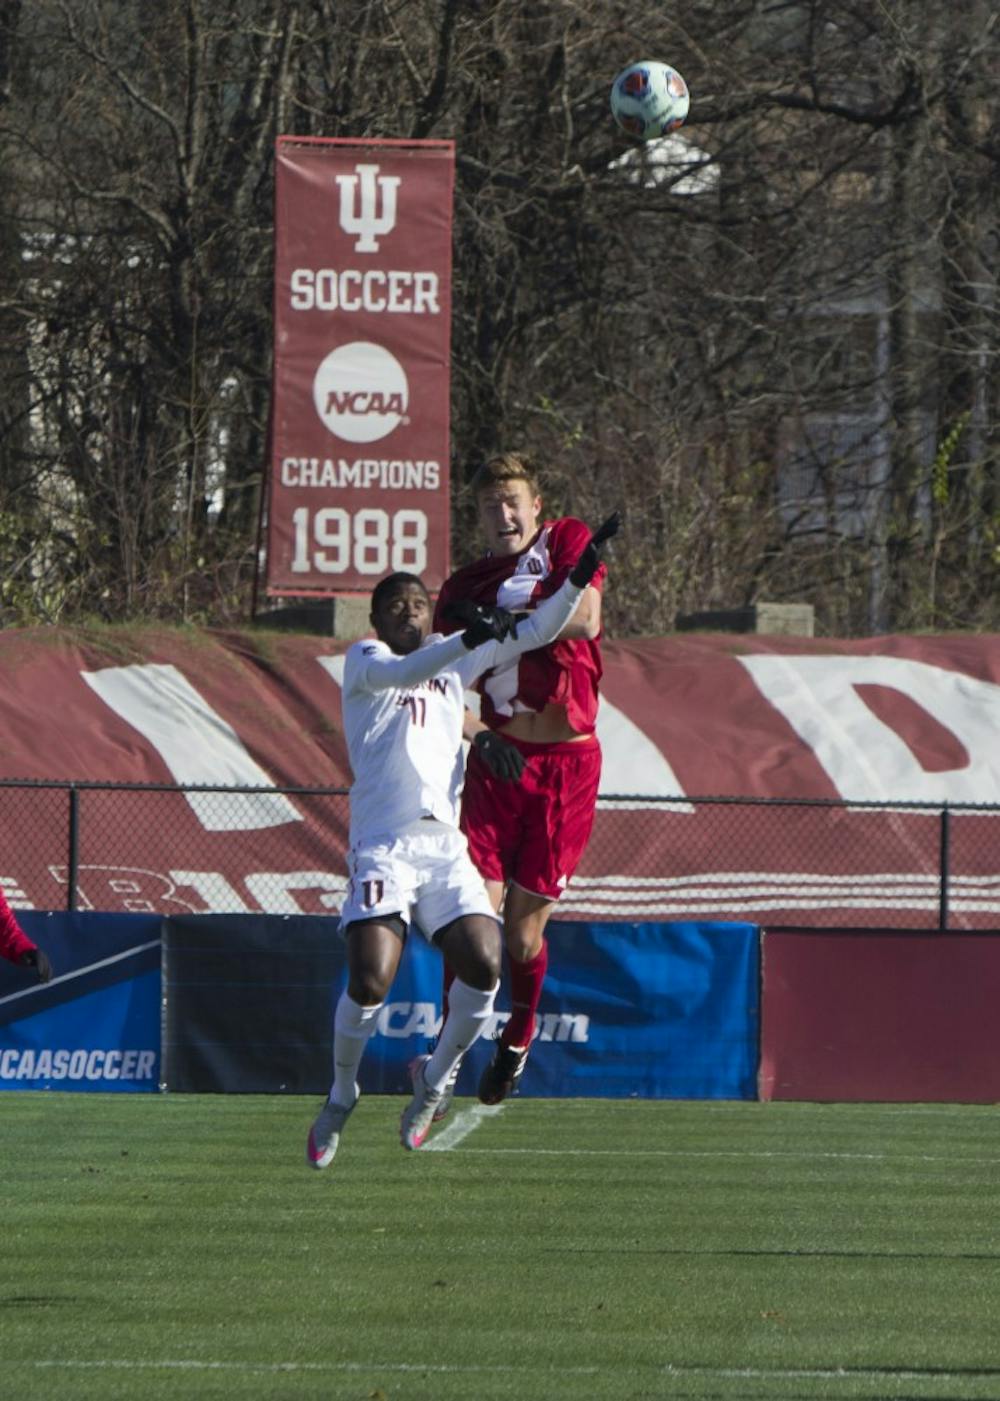 Sophomore defender Grant Lillard jumps up for a header during the first half of play against UConn on Sunday at Bill Armstrong Stadium. The Hoosiers won 1-0.